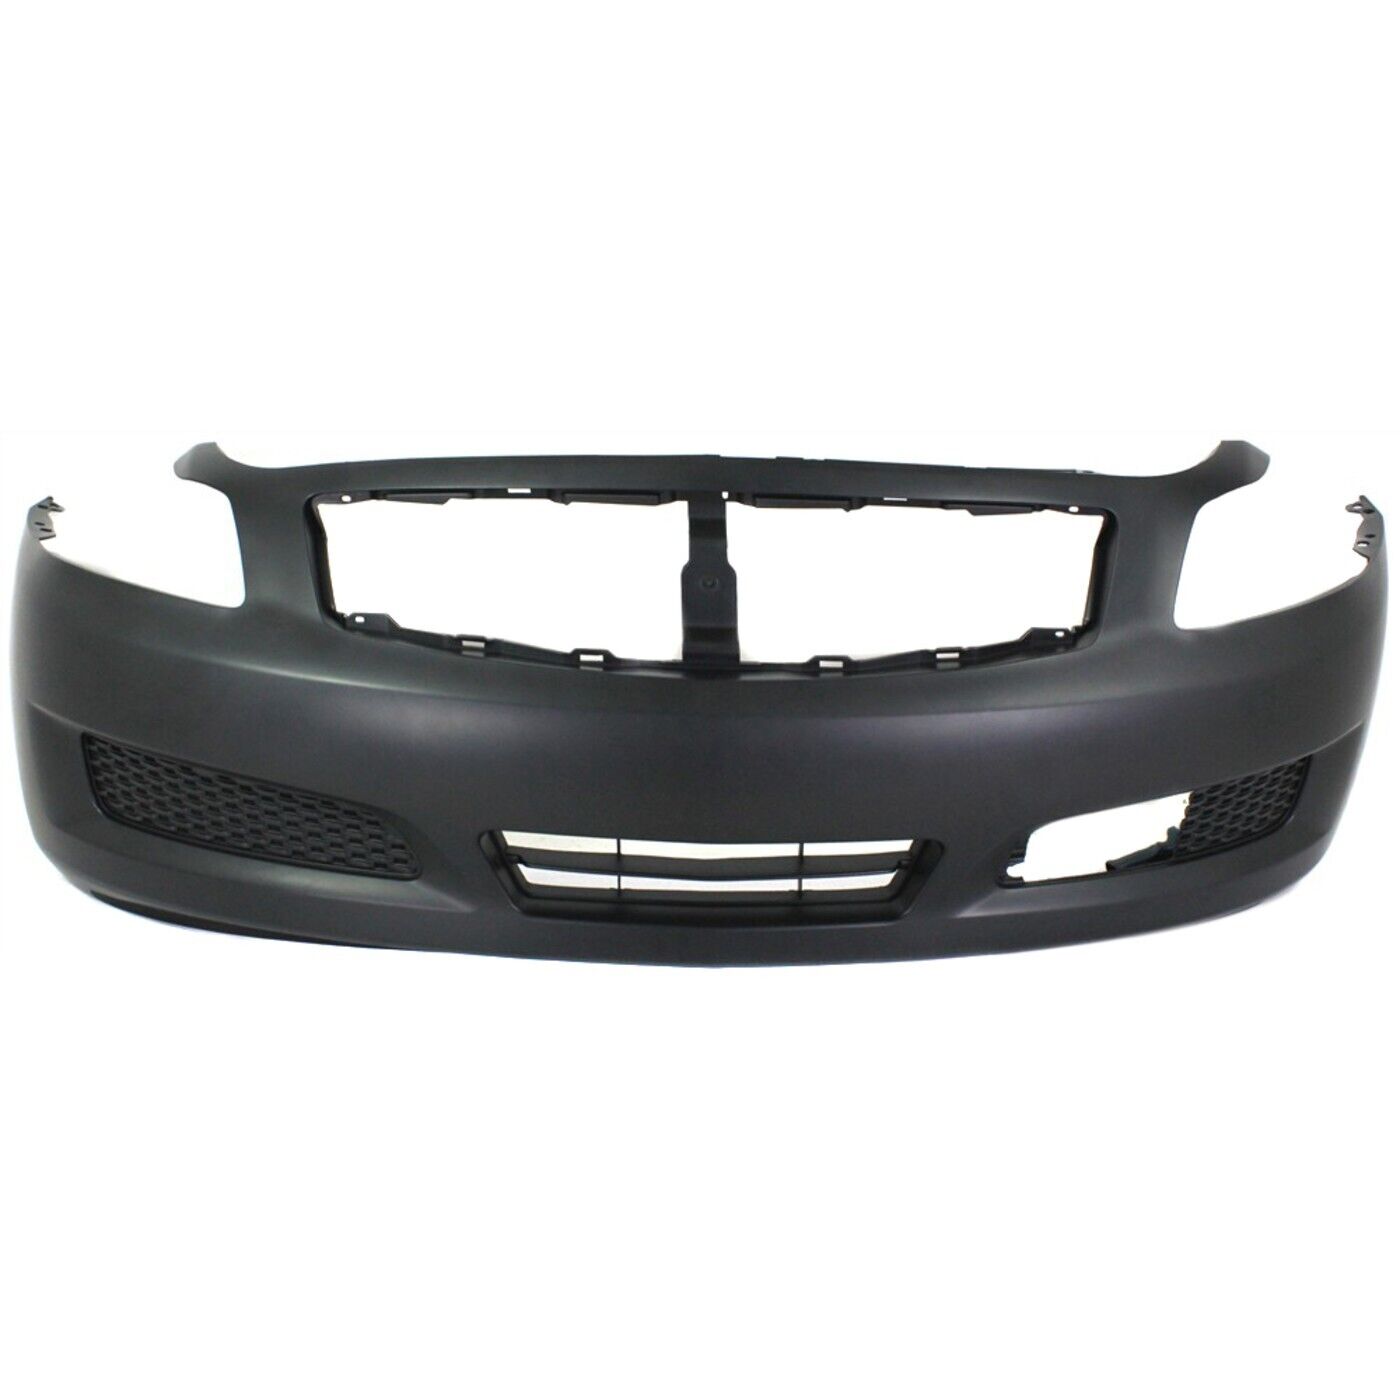 Bumper Cover For 2007-2008 Infiniti G35 Front Primed With Technology Package